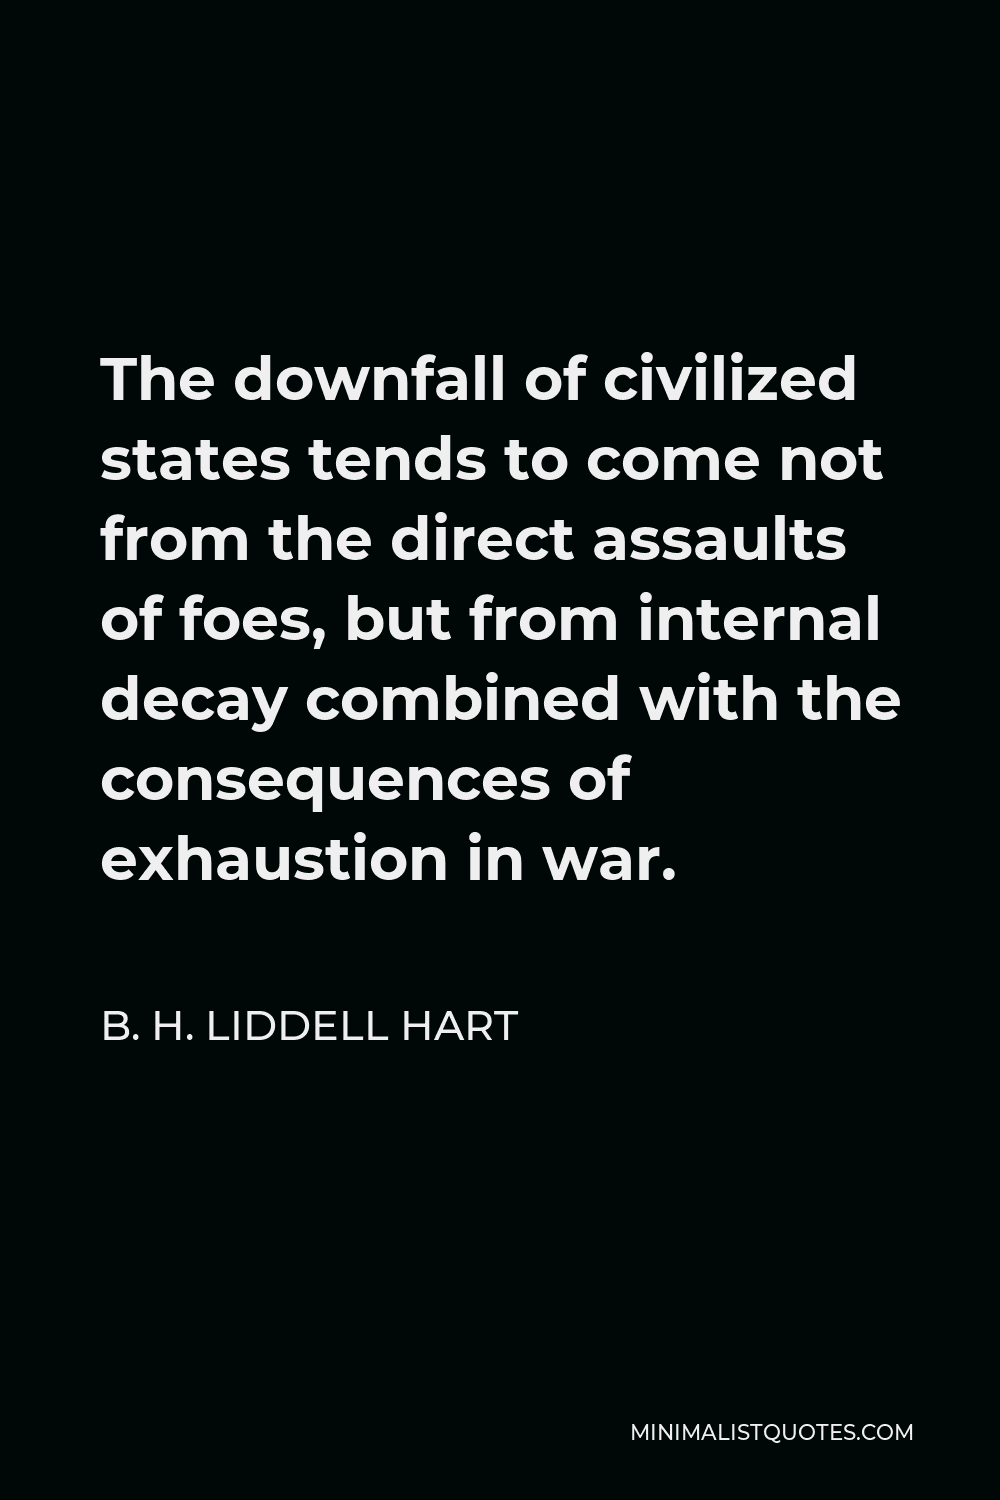 B. H. Liddell Hart Quote - The downfall of civilized states tends to come not from the direct assaults of foes, but from internal decay combined with the consequences of exhaustion in war.